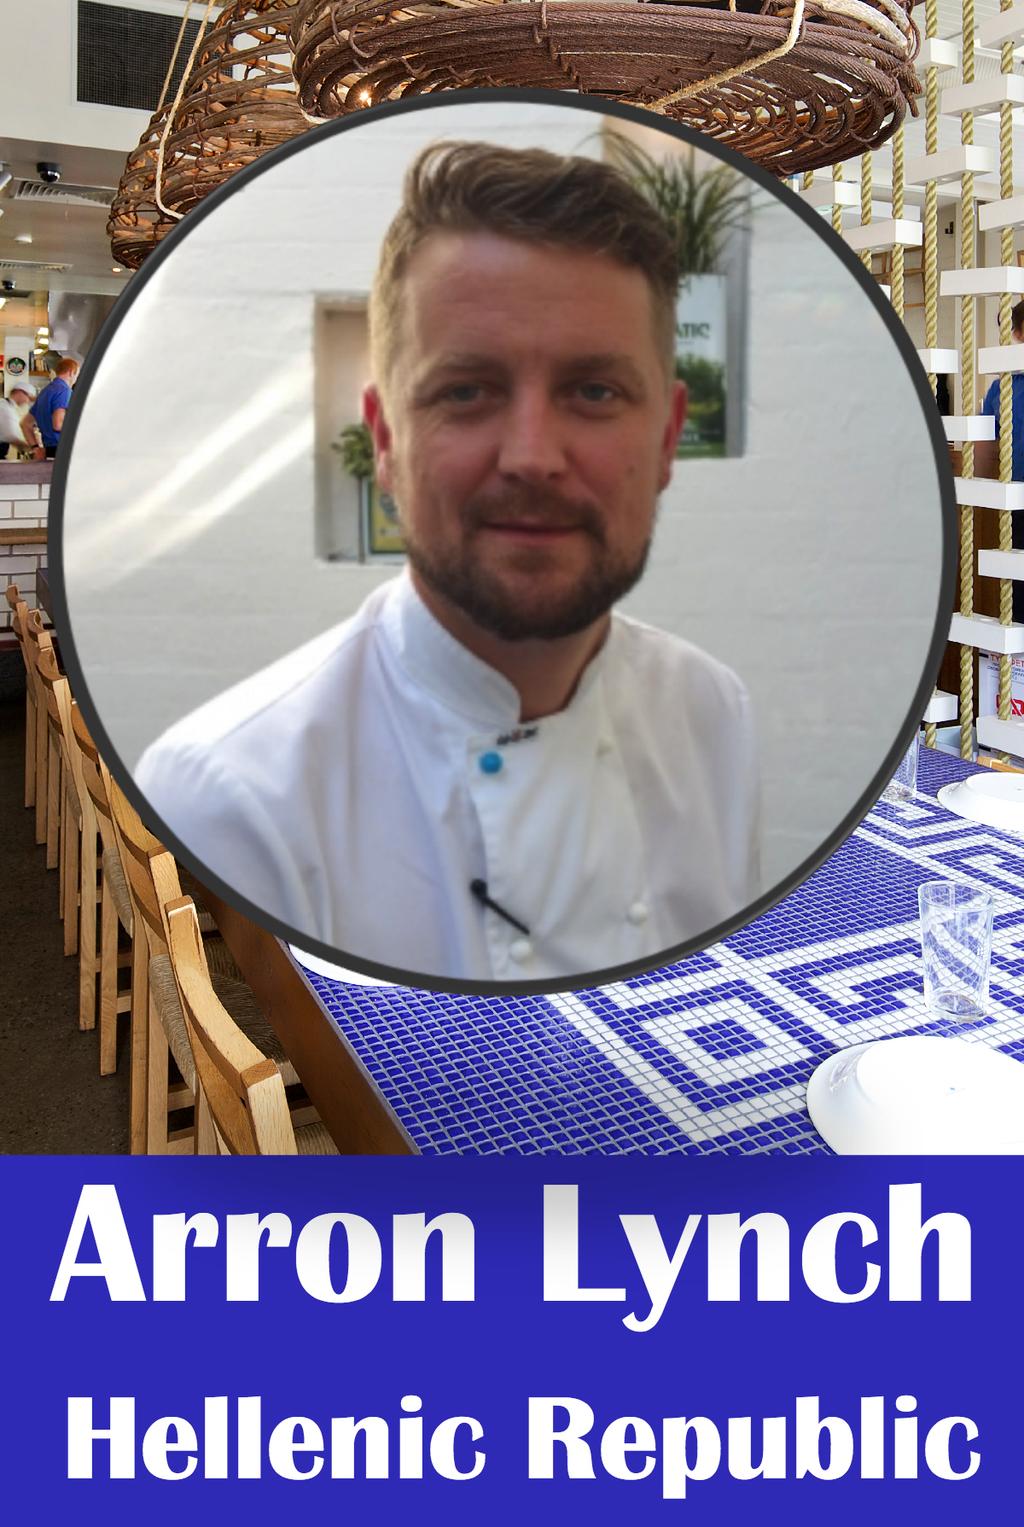 top chefs class date 23 May cost $105 Arron Lynch, Head Chef at Hellenic Republic Brunswick, offers traditional Greek cuisine with a contemporary twist, aiming not to deconstruct or